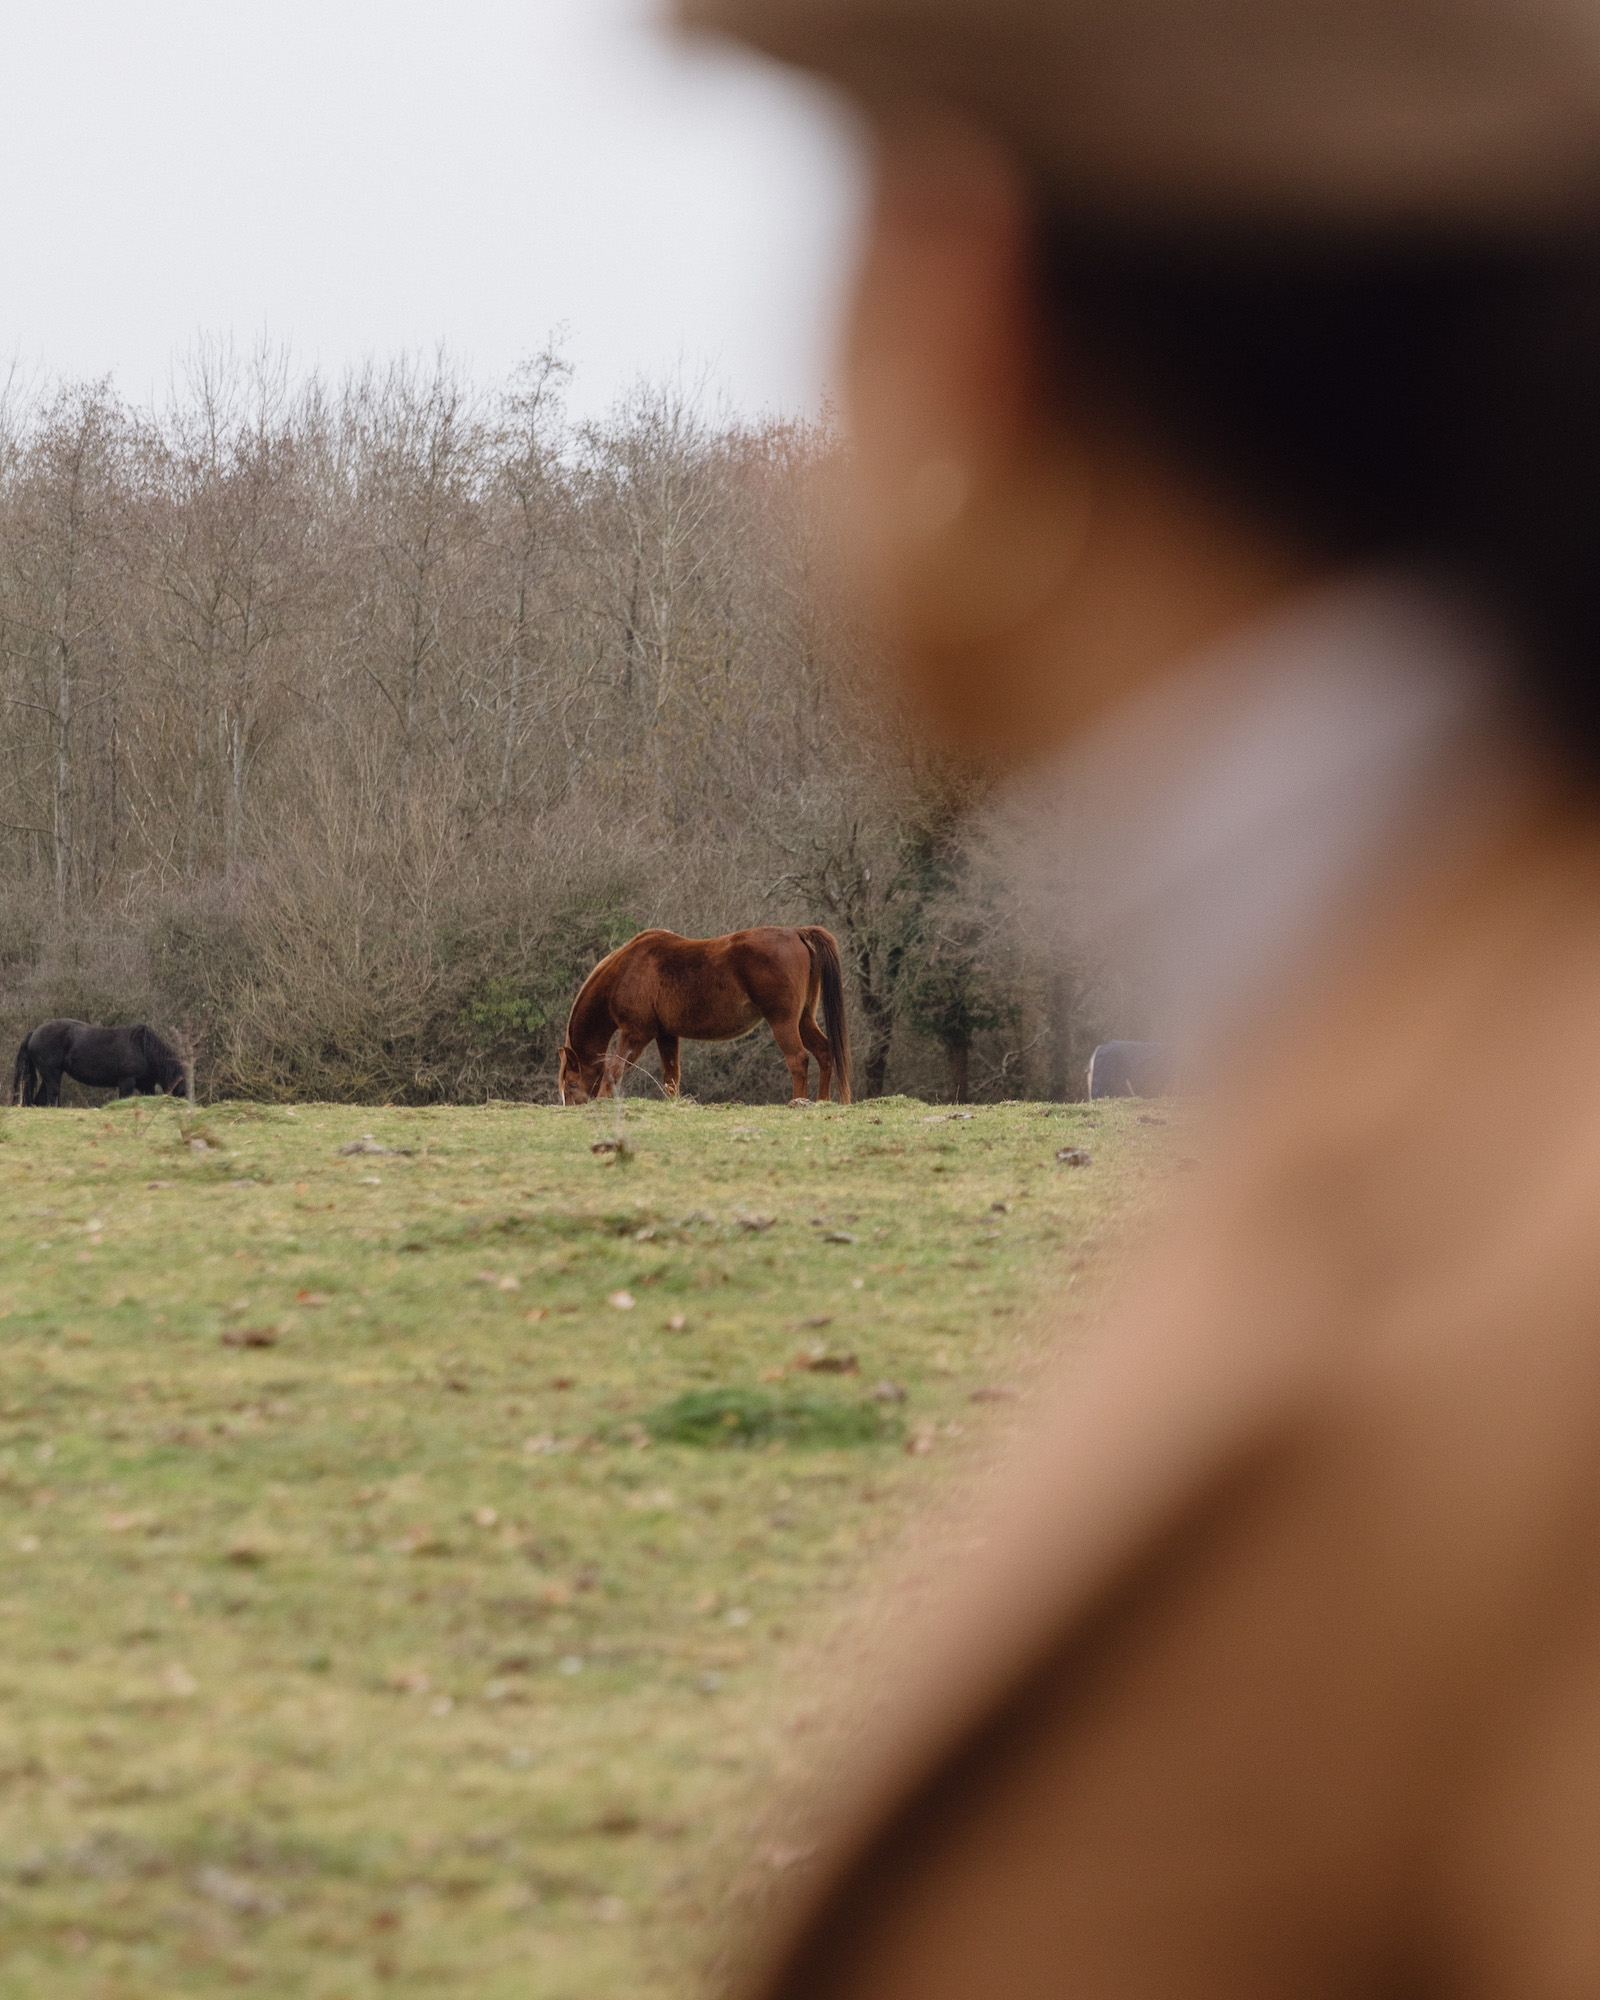 A woman looking at a horse in a field